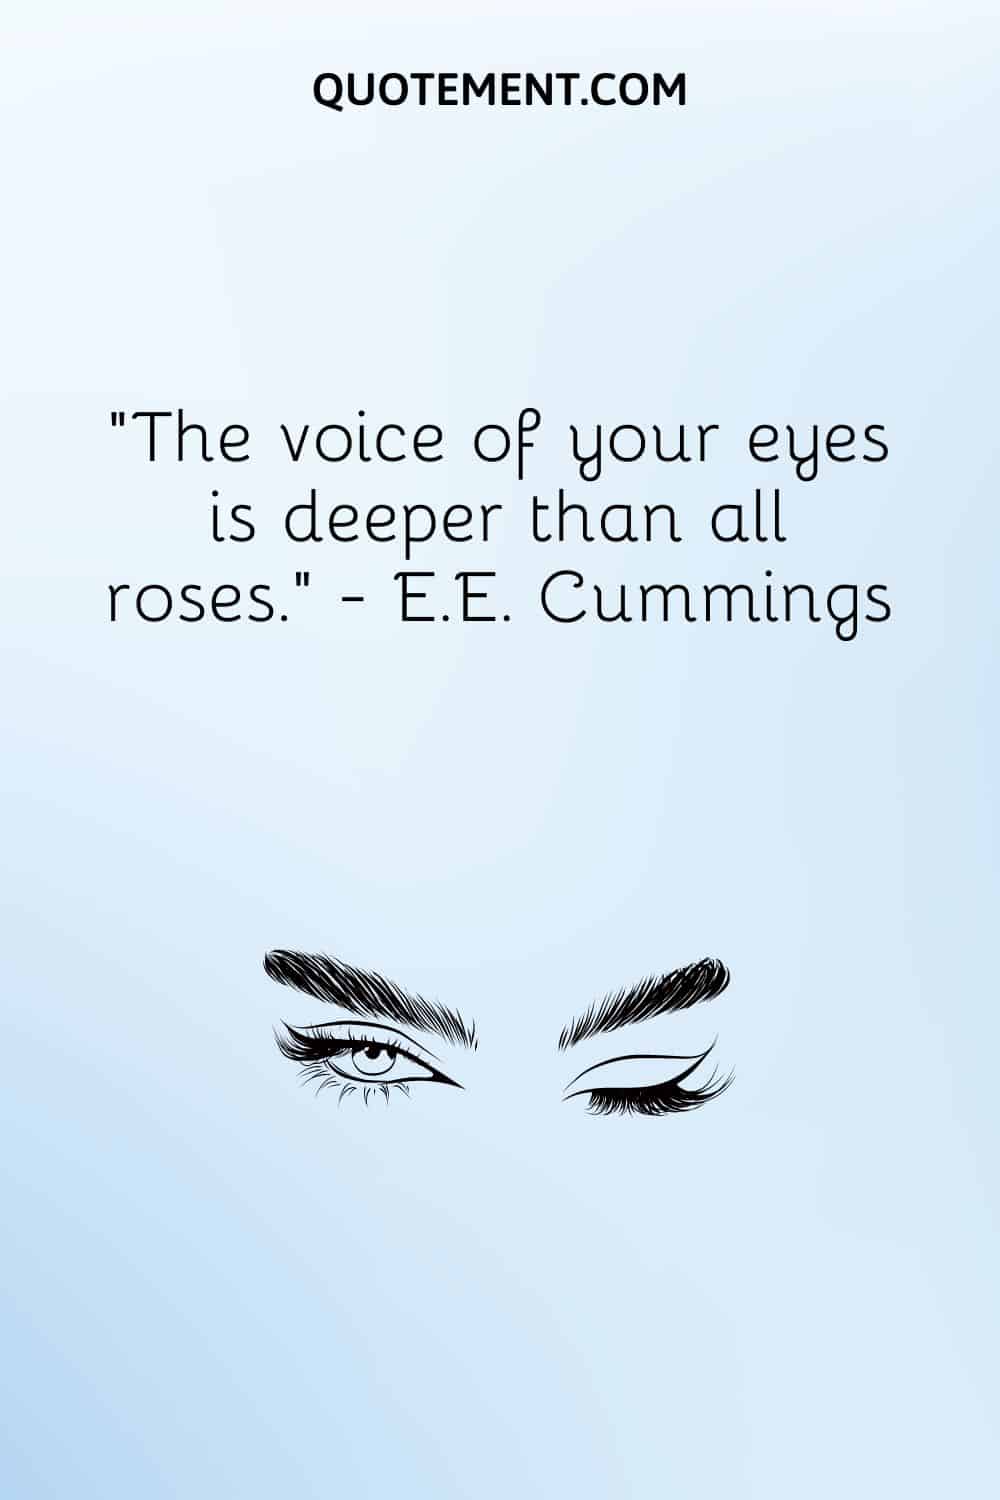 The voice of your eyes is deeper than all roses